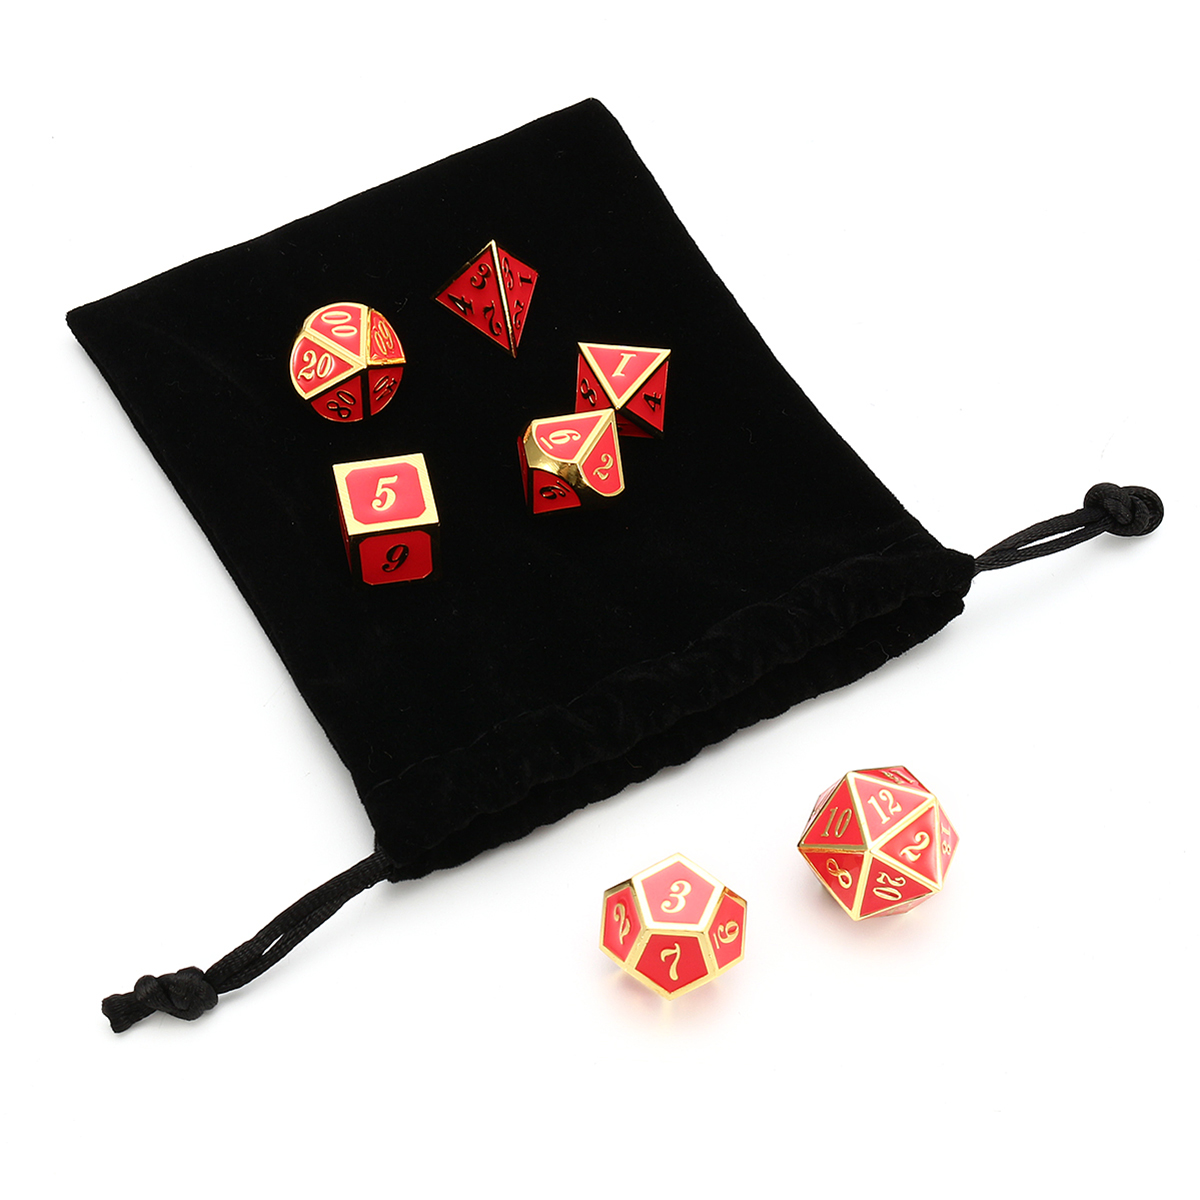 7pcs-Zinc-Alloy-Multisided-Dices-Set-Enamel-Embossed-Heavy-Metal-Polyhedral-Dice-With-Bag-1272100-3